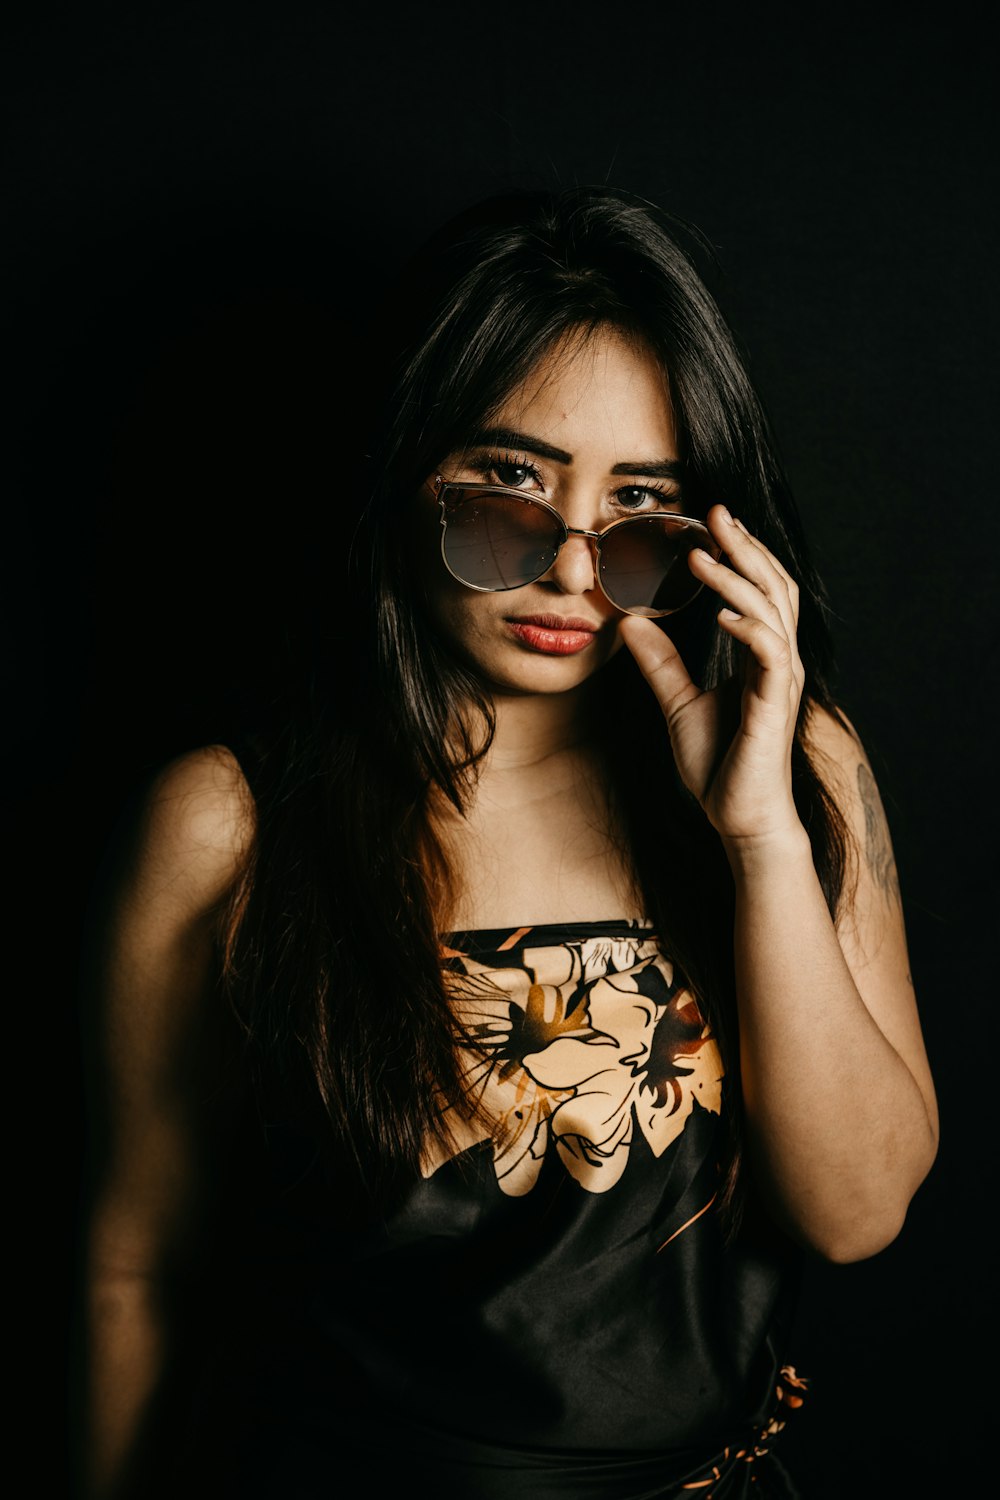 woman in black and white floral tube top wearing brown sunglasses